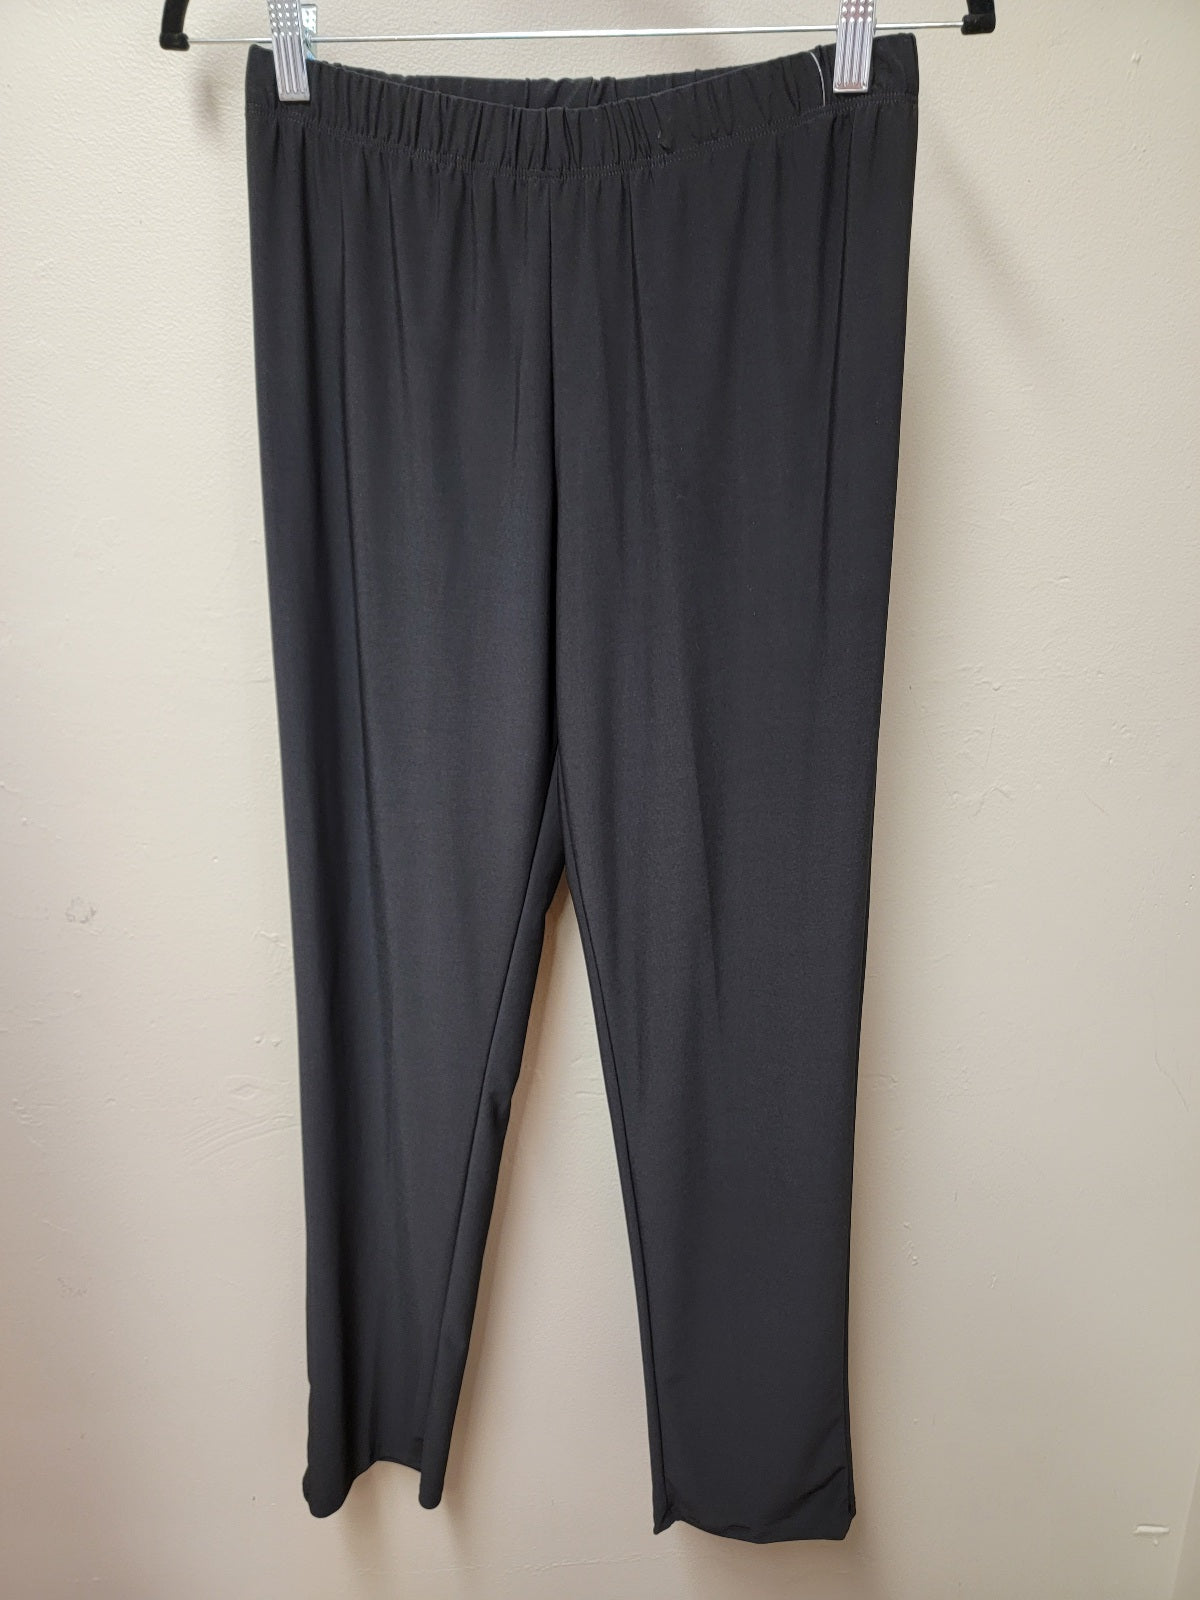 Silky Casual or Dressy Lightweight Black Pants